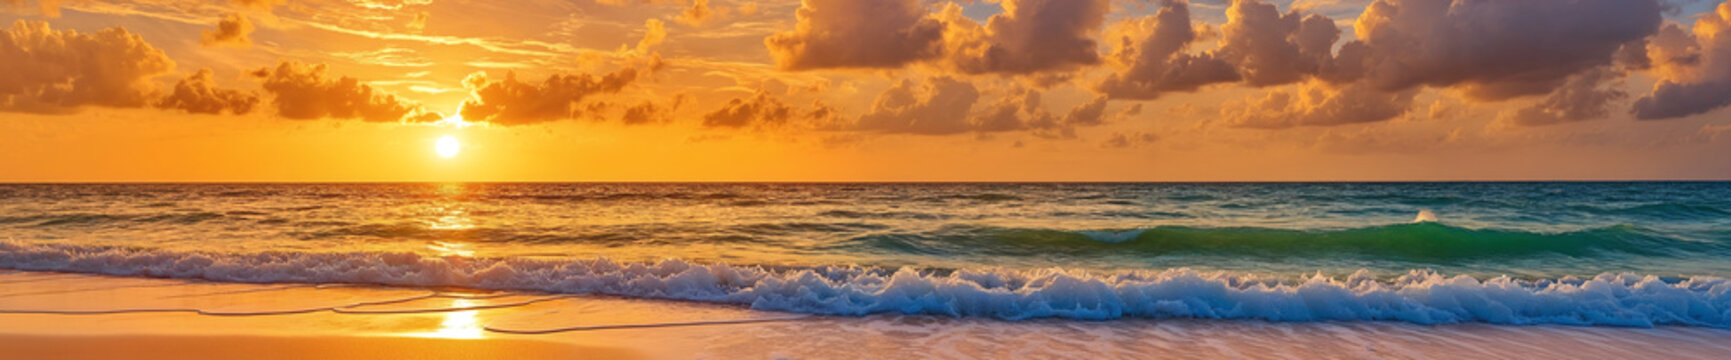 Spectacular sunset view on the secluded sand beach with rolling waves and a picturesque cloudy sky